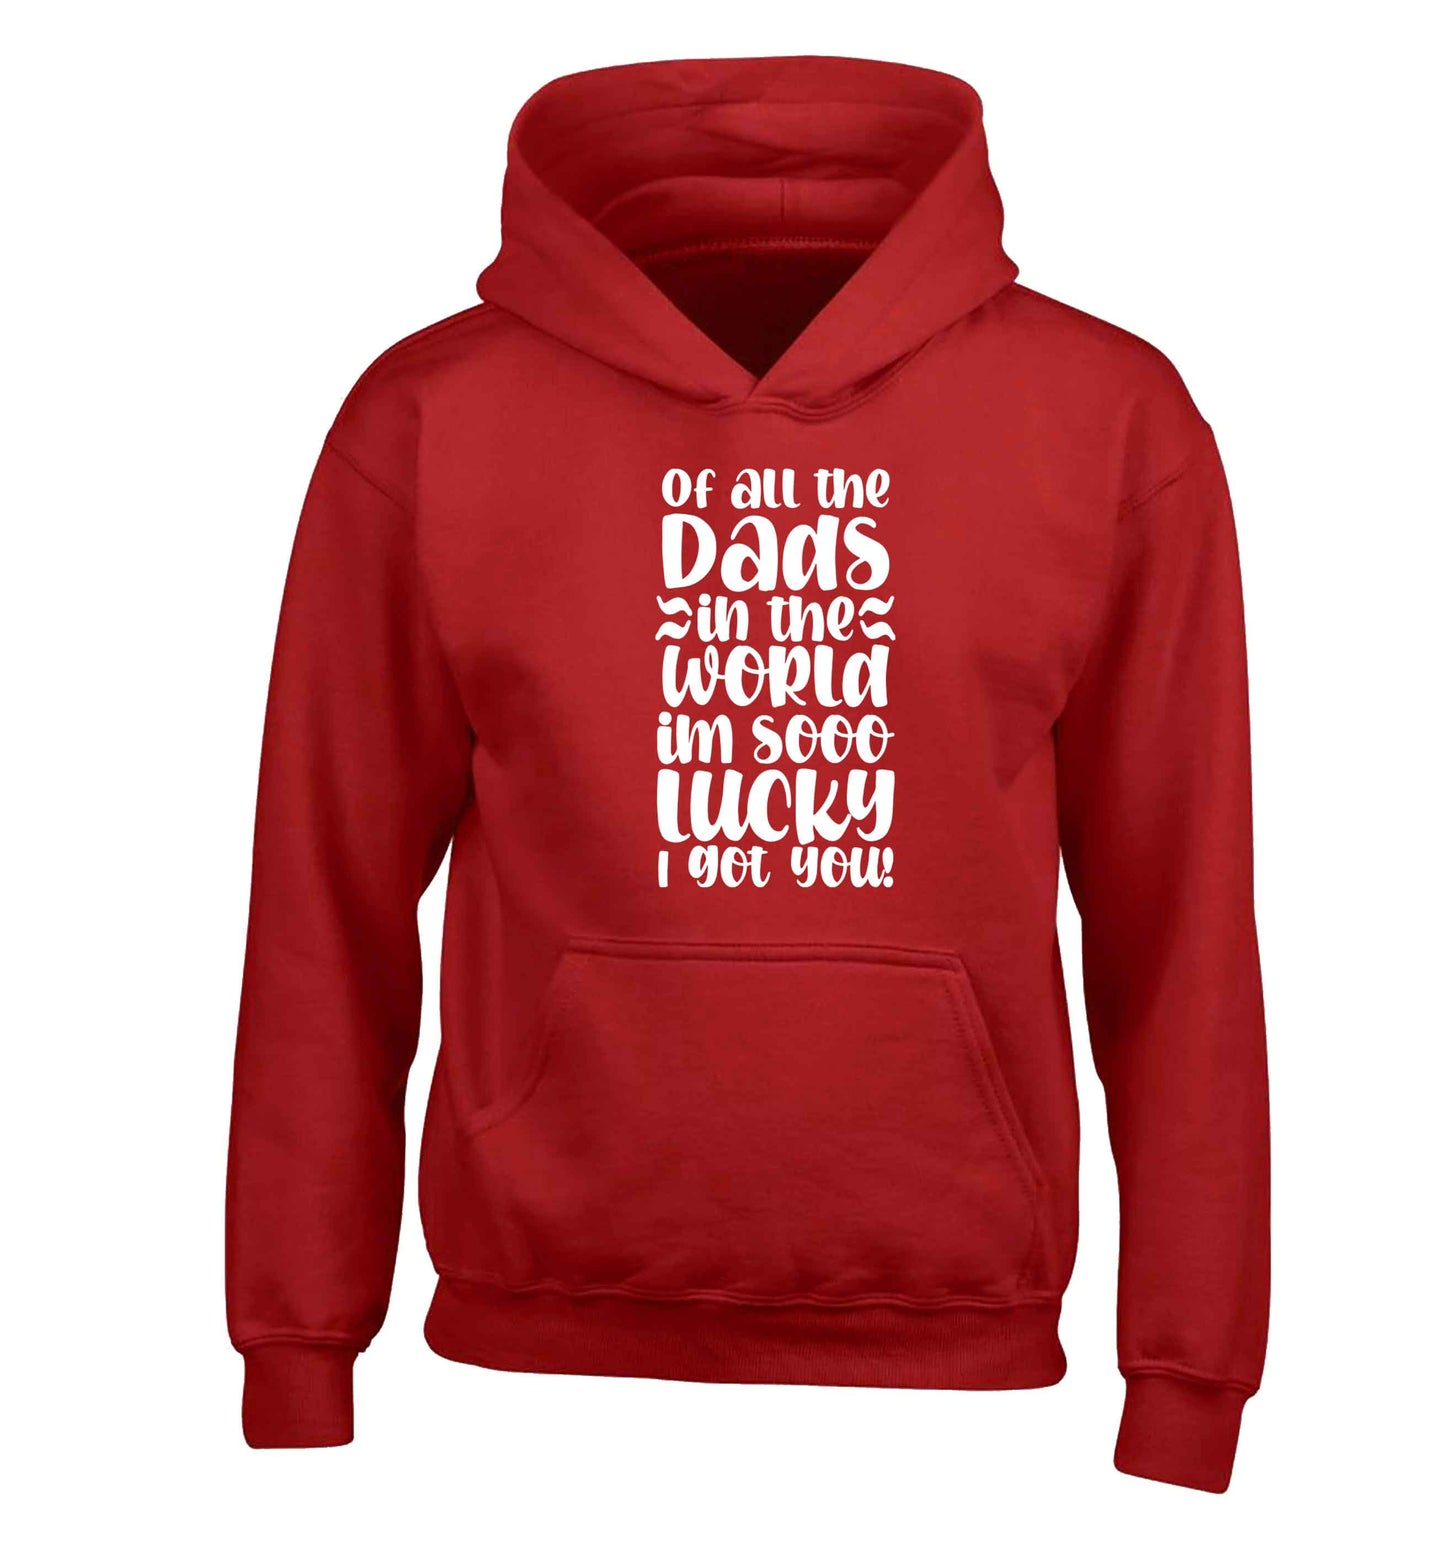 I'm as lucky as can be the worlds greatest dad belongs to me! children's red hoodie 12-13 Years